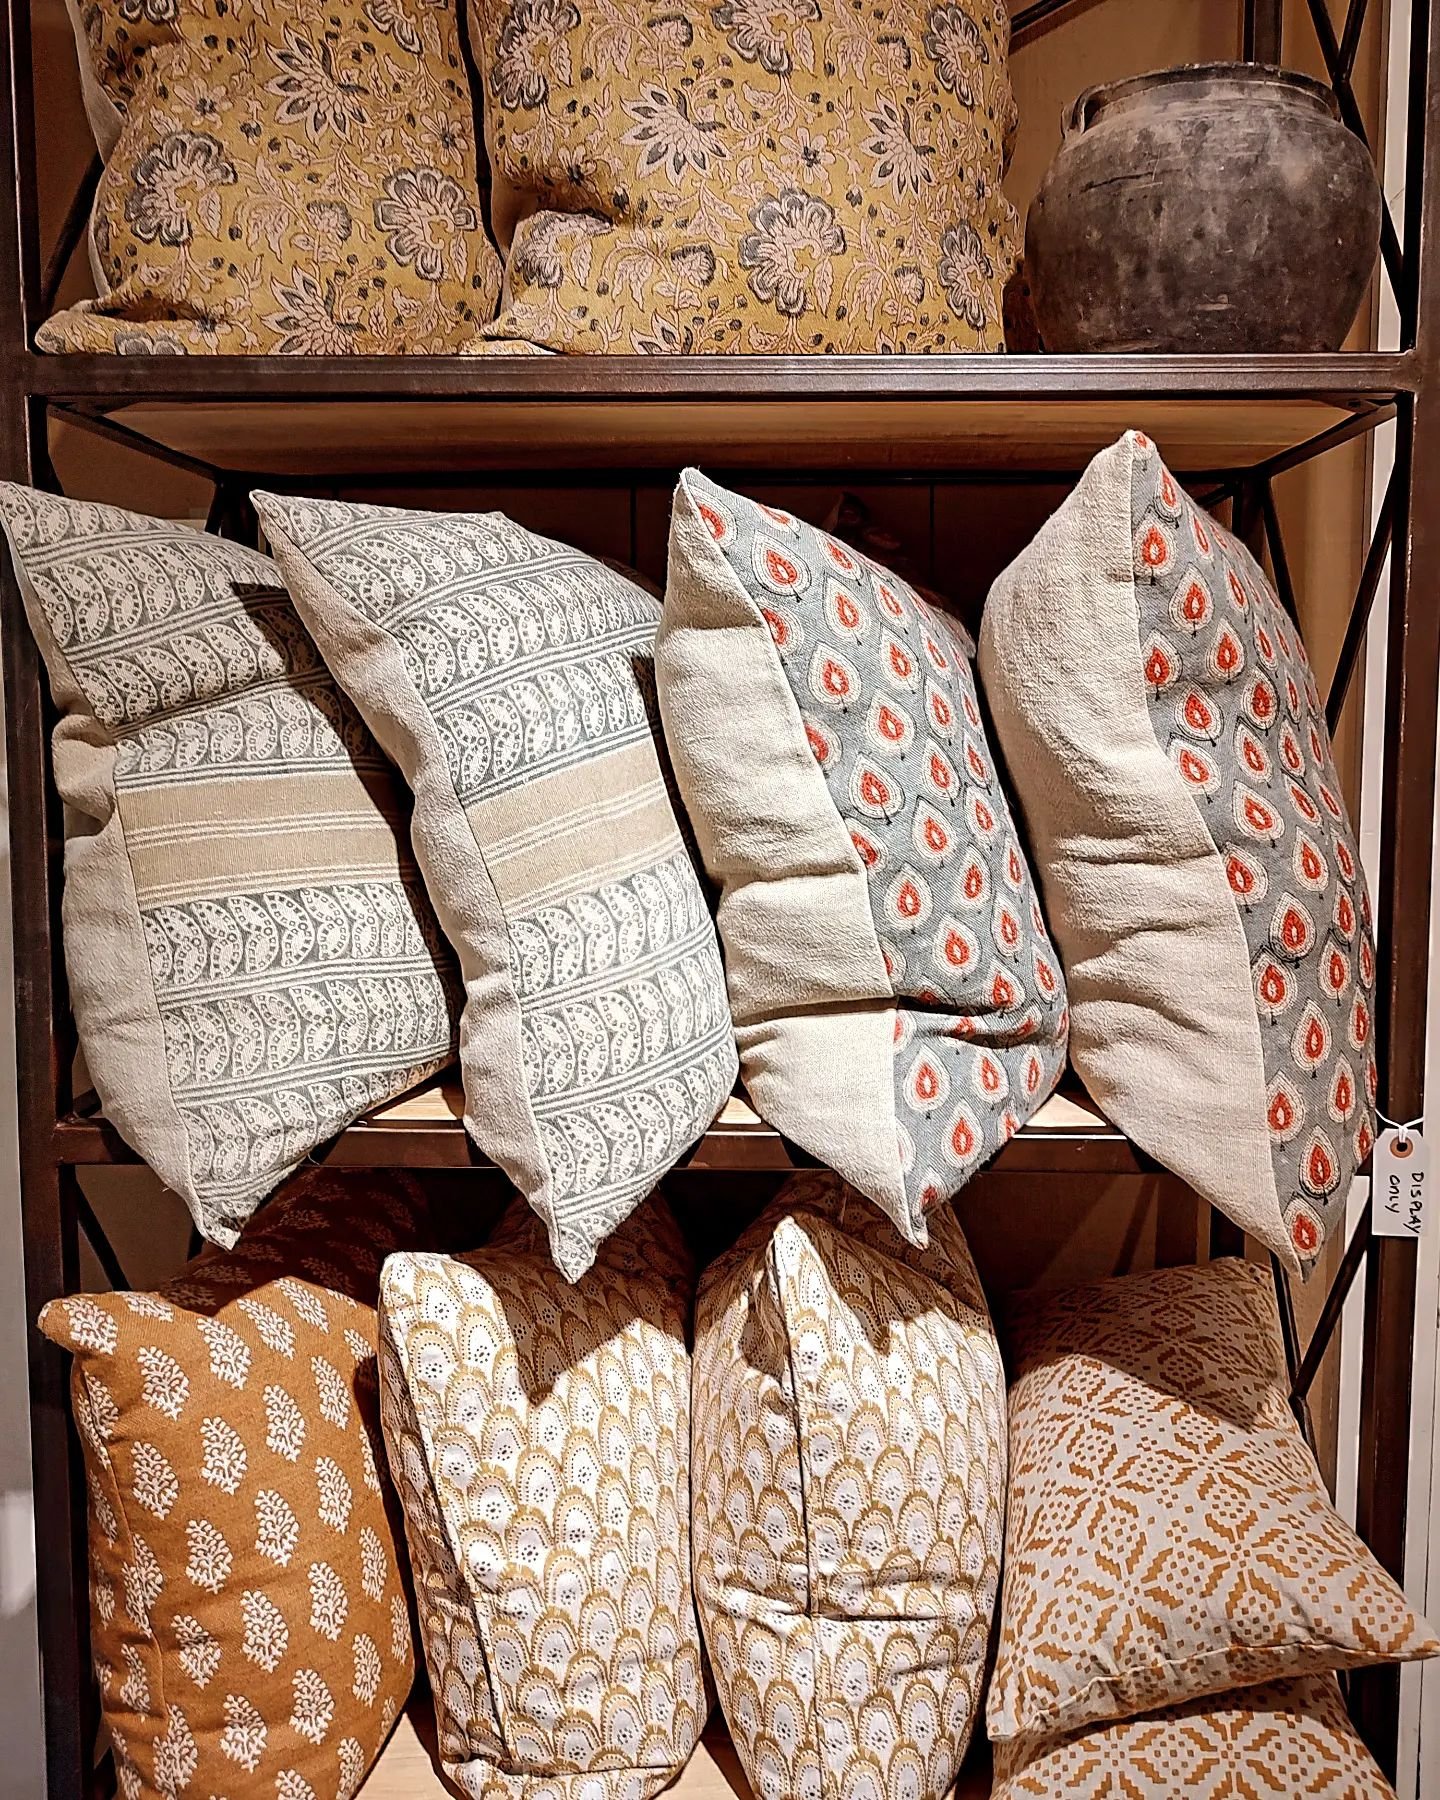 Our clients LOVE our pillows and they tell us we have the best selection anywhere.  Artisan made, down filled in linen, wool, cotton and hemp.  The various textures add interest to any room.  Large, curated selection in all colors.  #pillows #instock